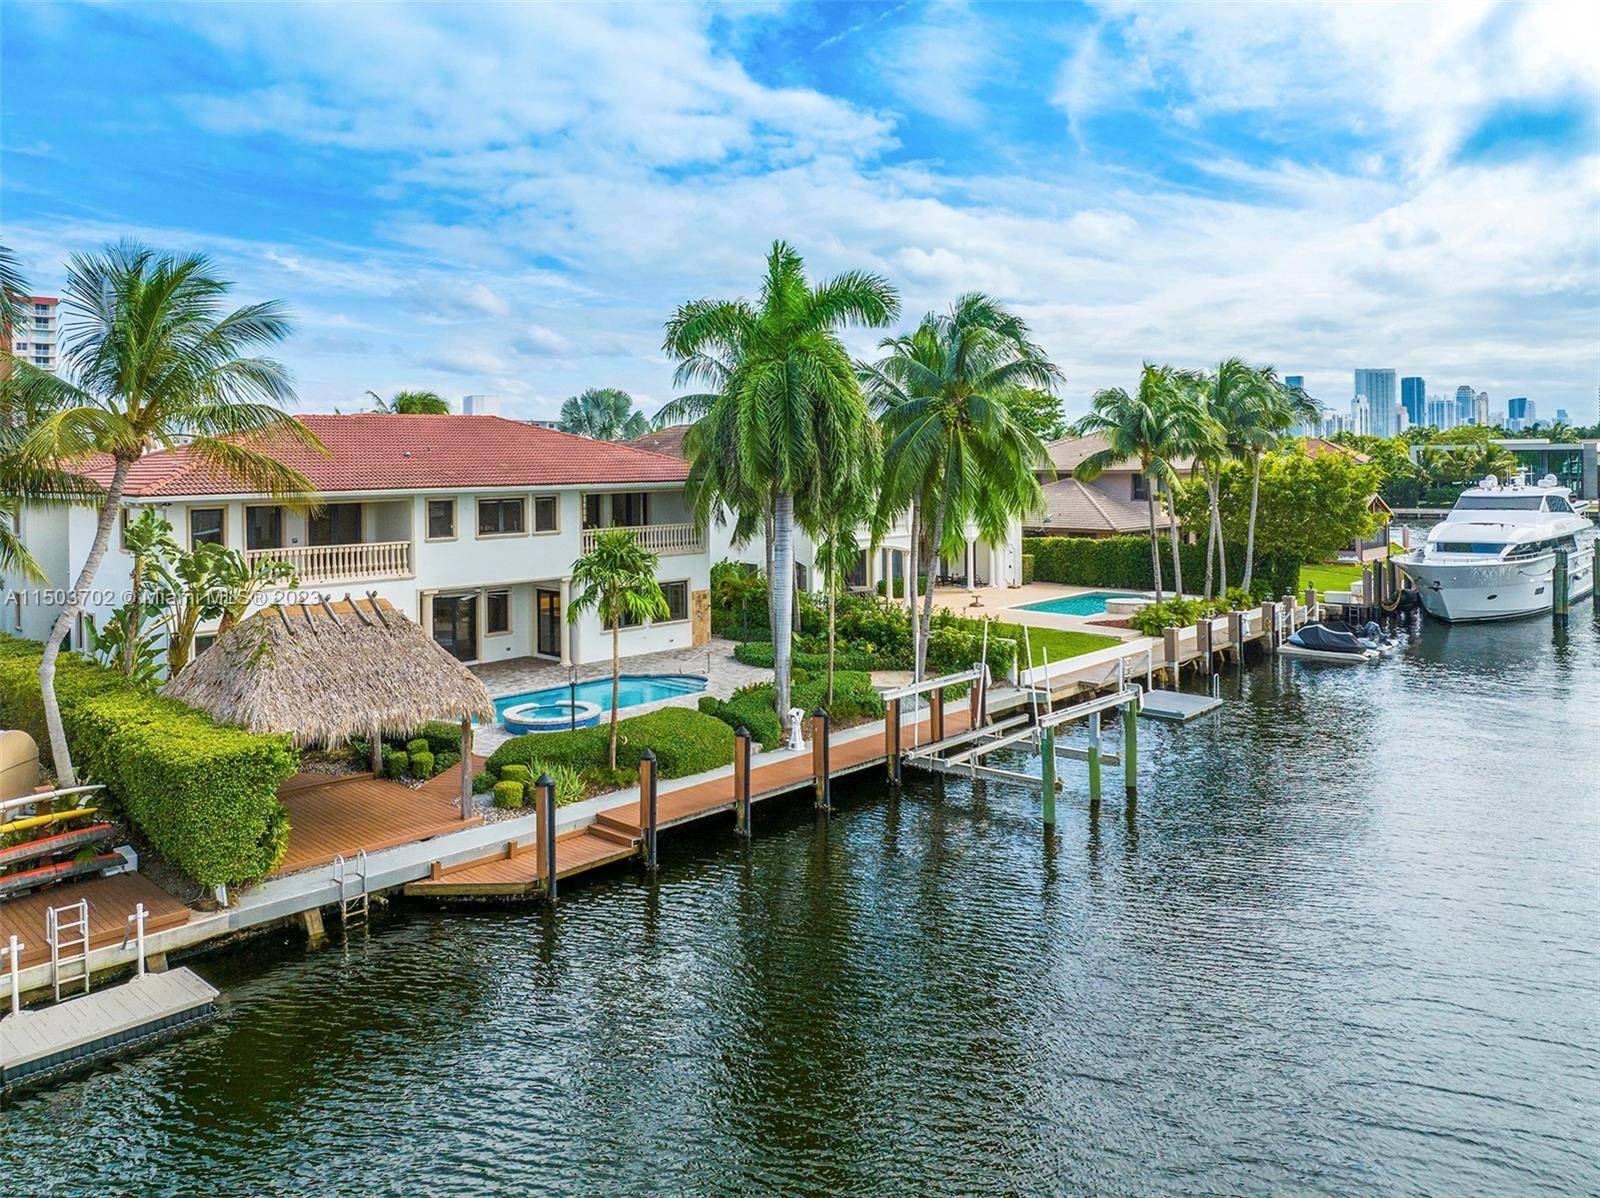 Two story waterfront home in Golden Isles, epitomizing South Florida s charm.